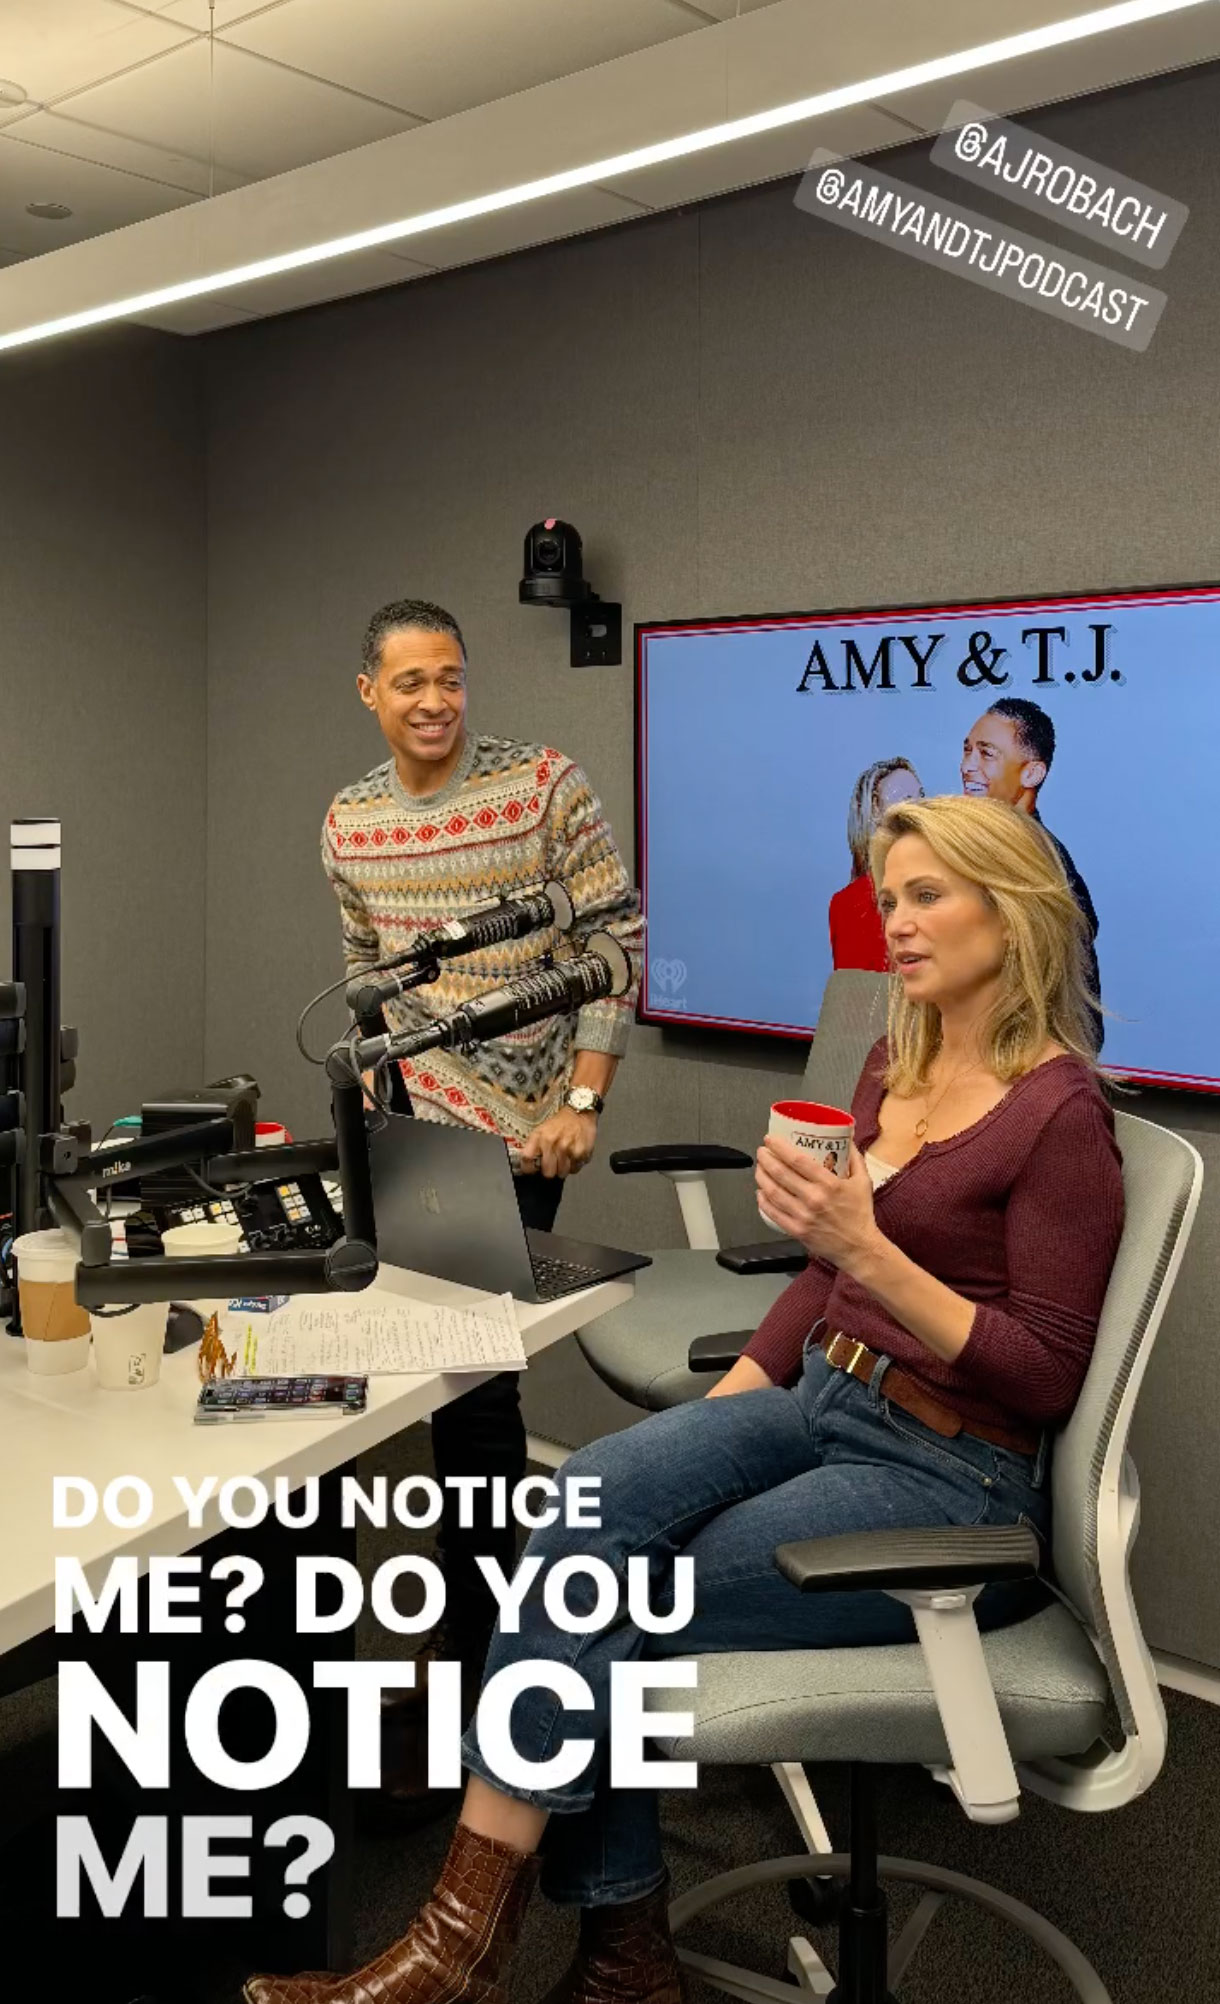 The couple now co-host the Amy & T.J. Podcast together